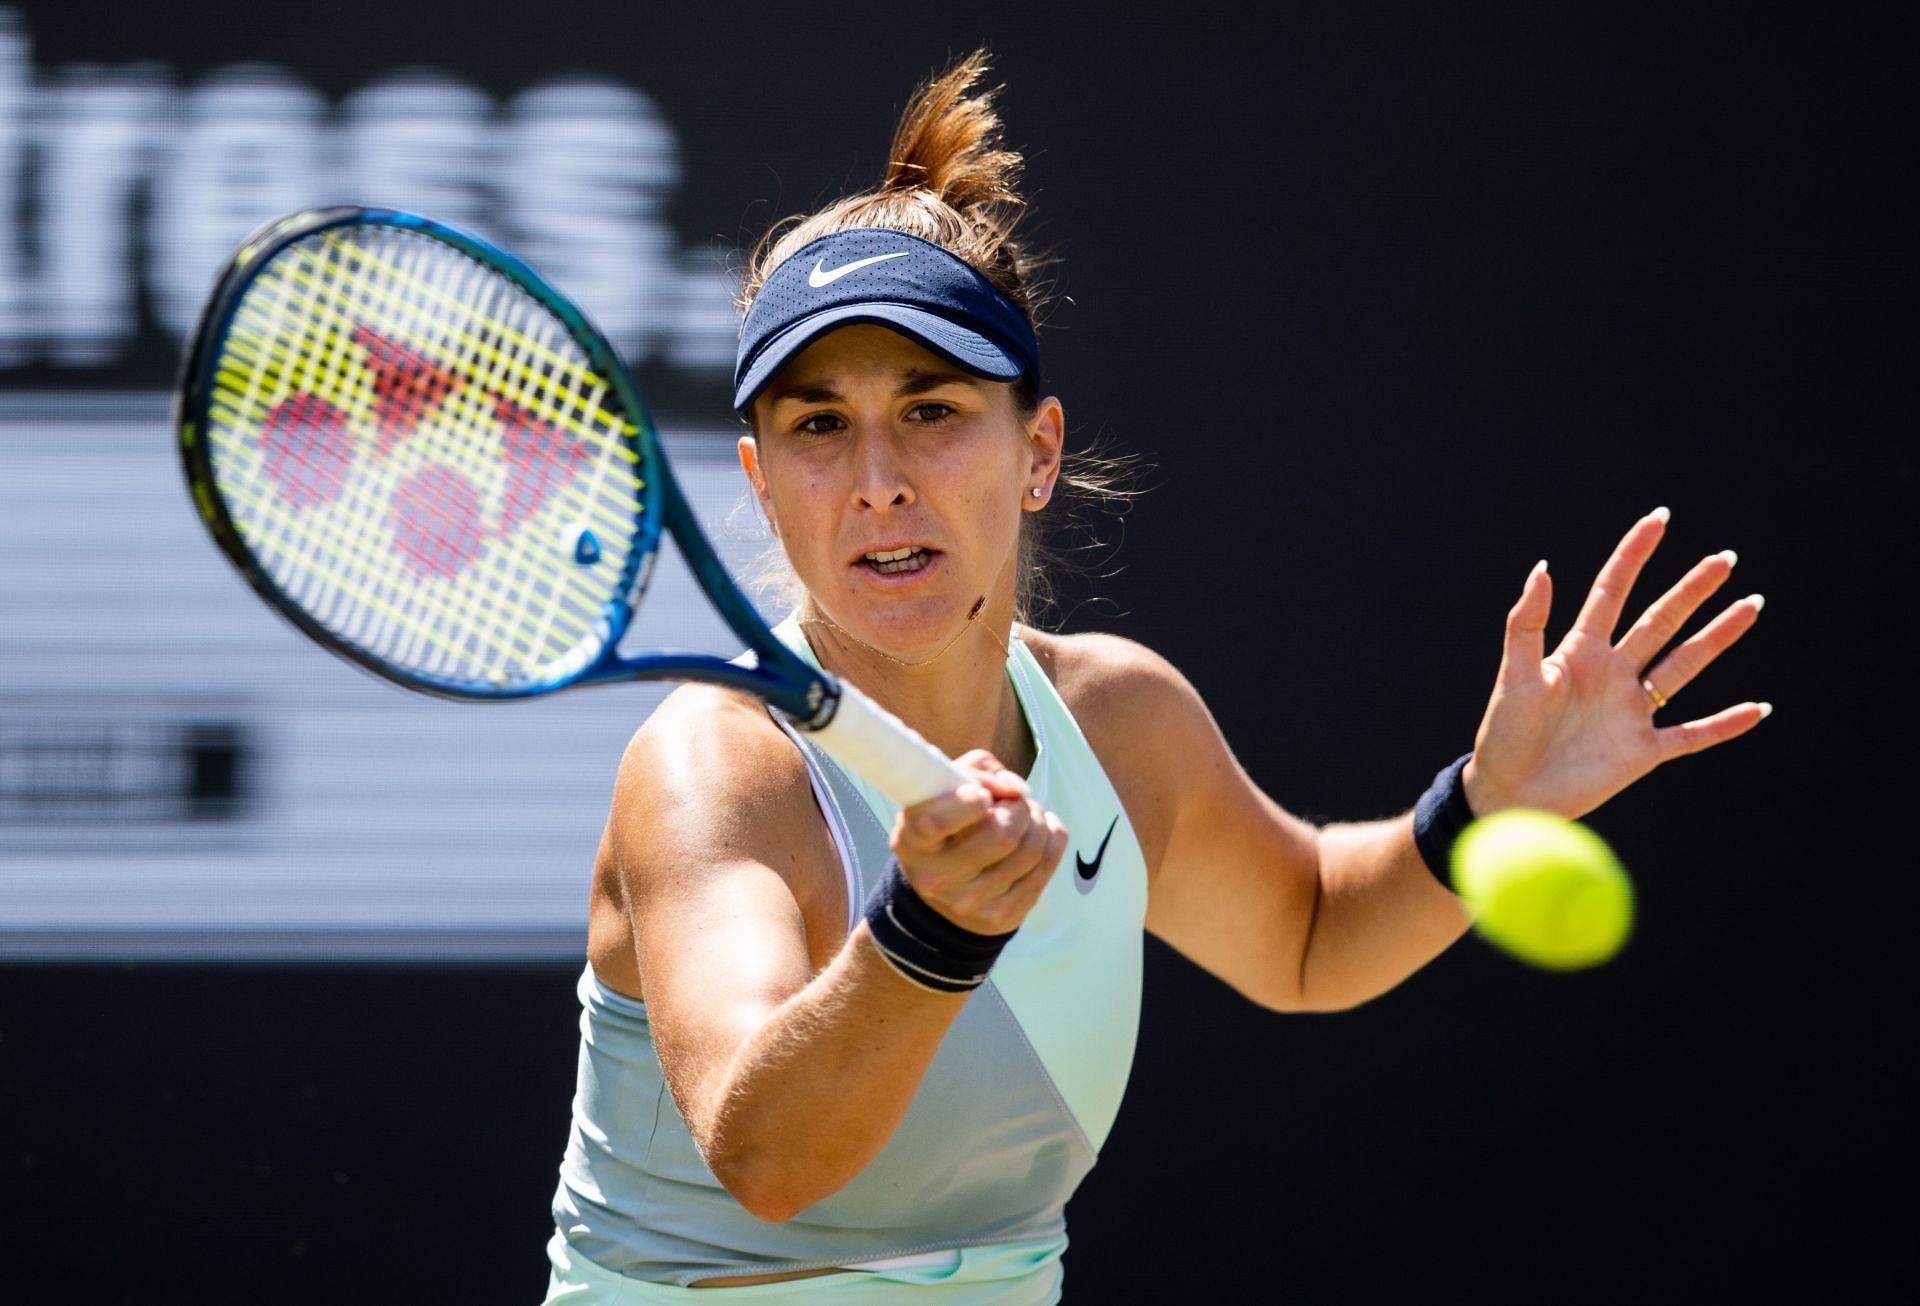 Second seed Belinda Bencic will carry home hopes at the Ladies Open